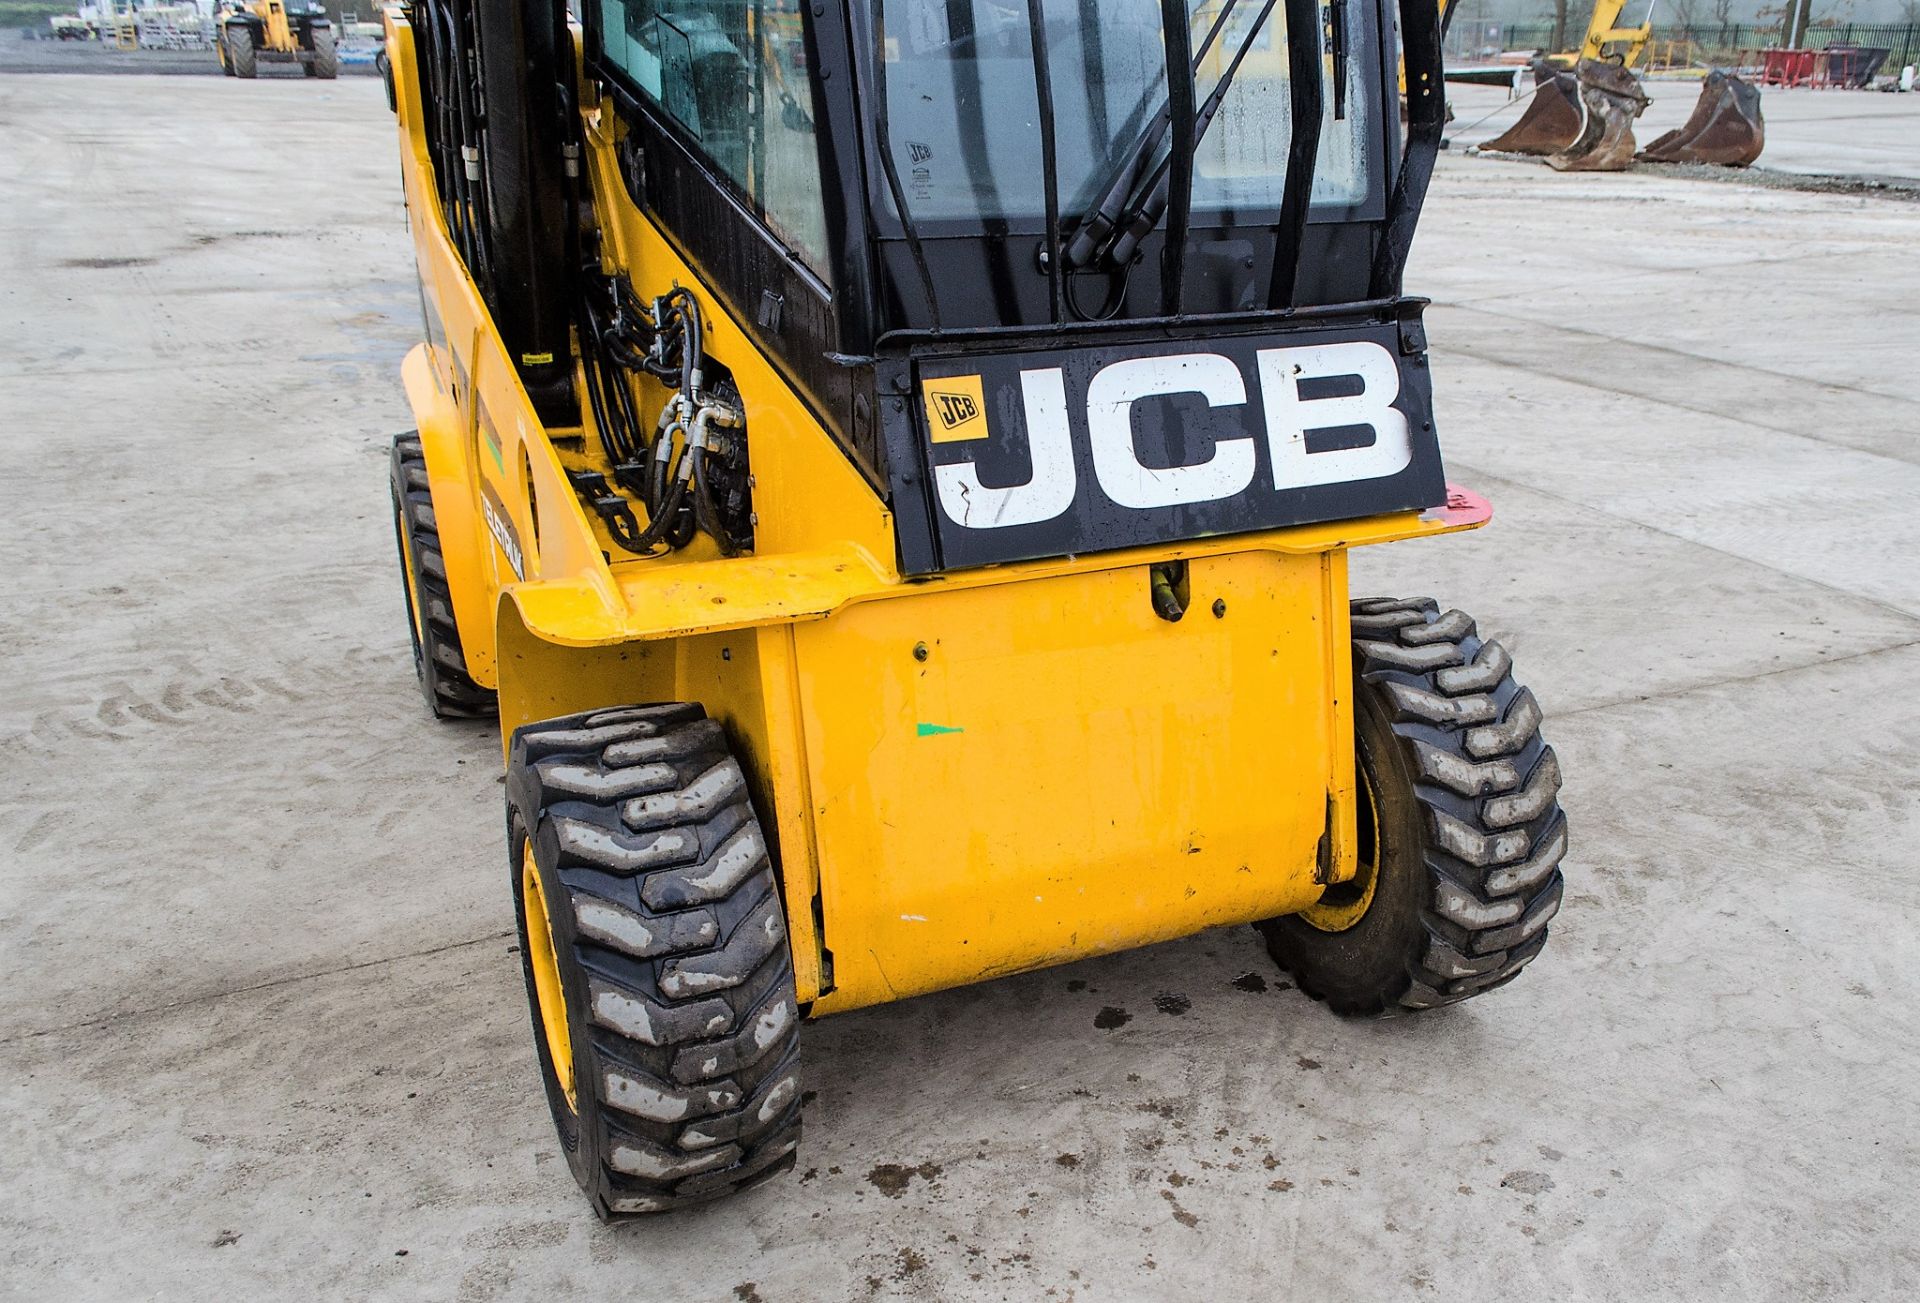 JCB Teletruk 30D 4x4 telescopic fork lift truck Year: 2013 S/N: 1541935 Recorded Hours: 1127 A623434 - Image 16 of 24